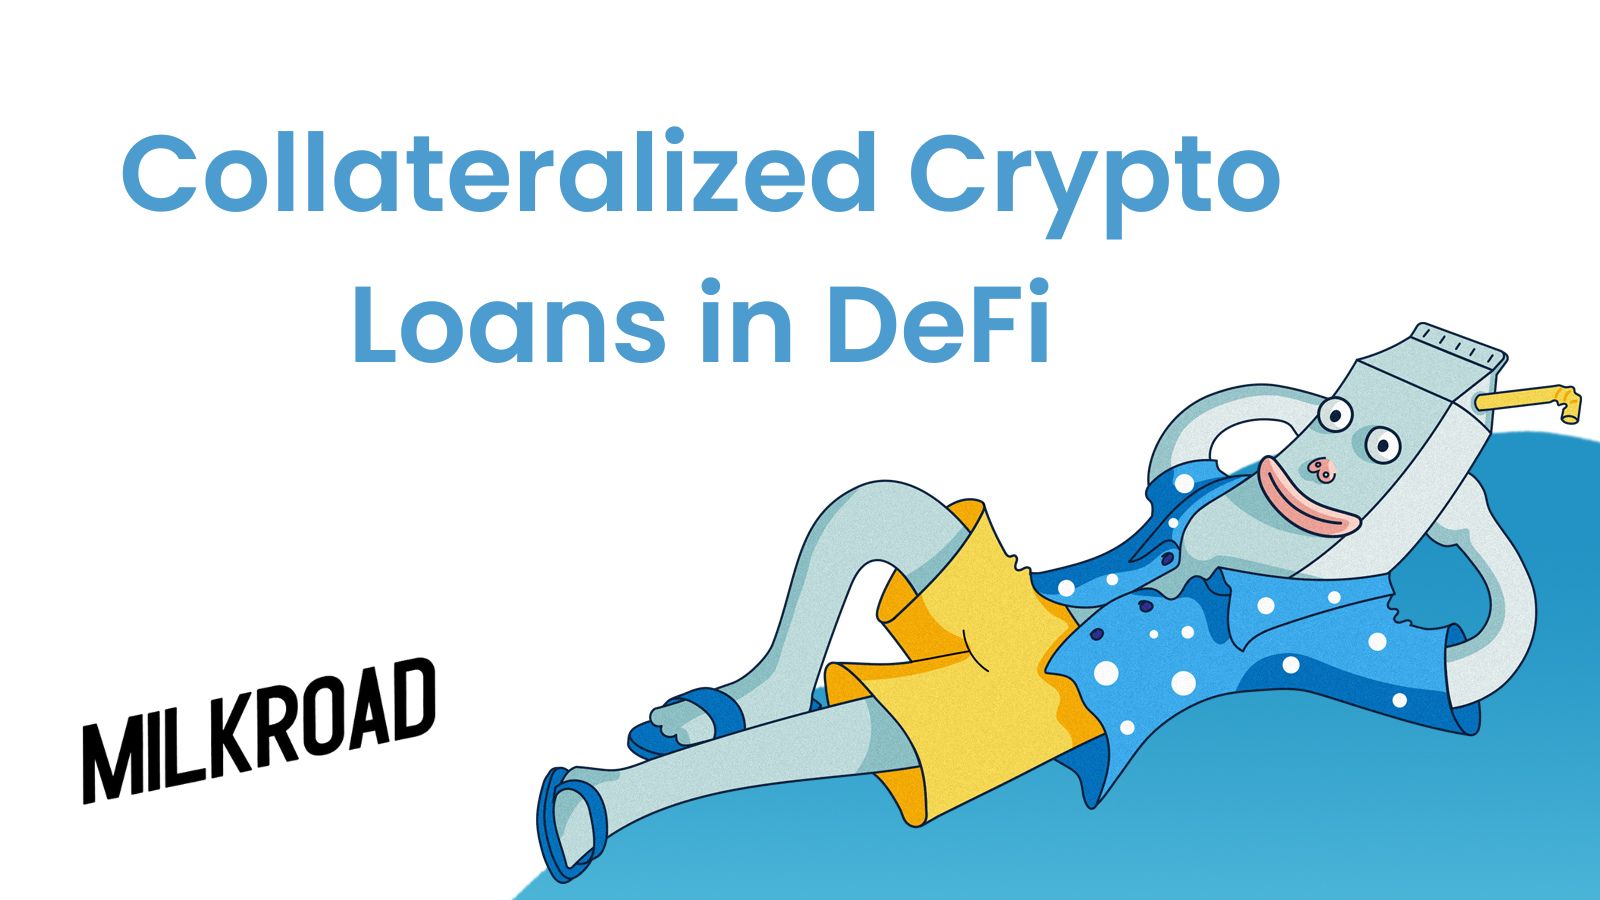 Collateralized Crypto Loans in DeFi